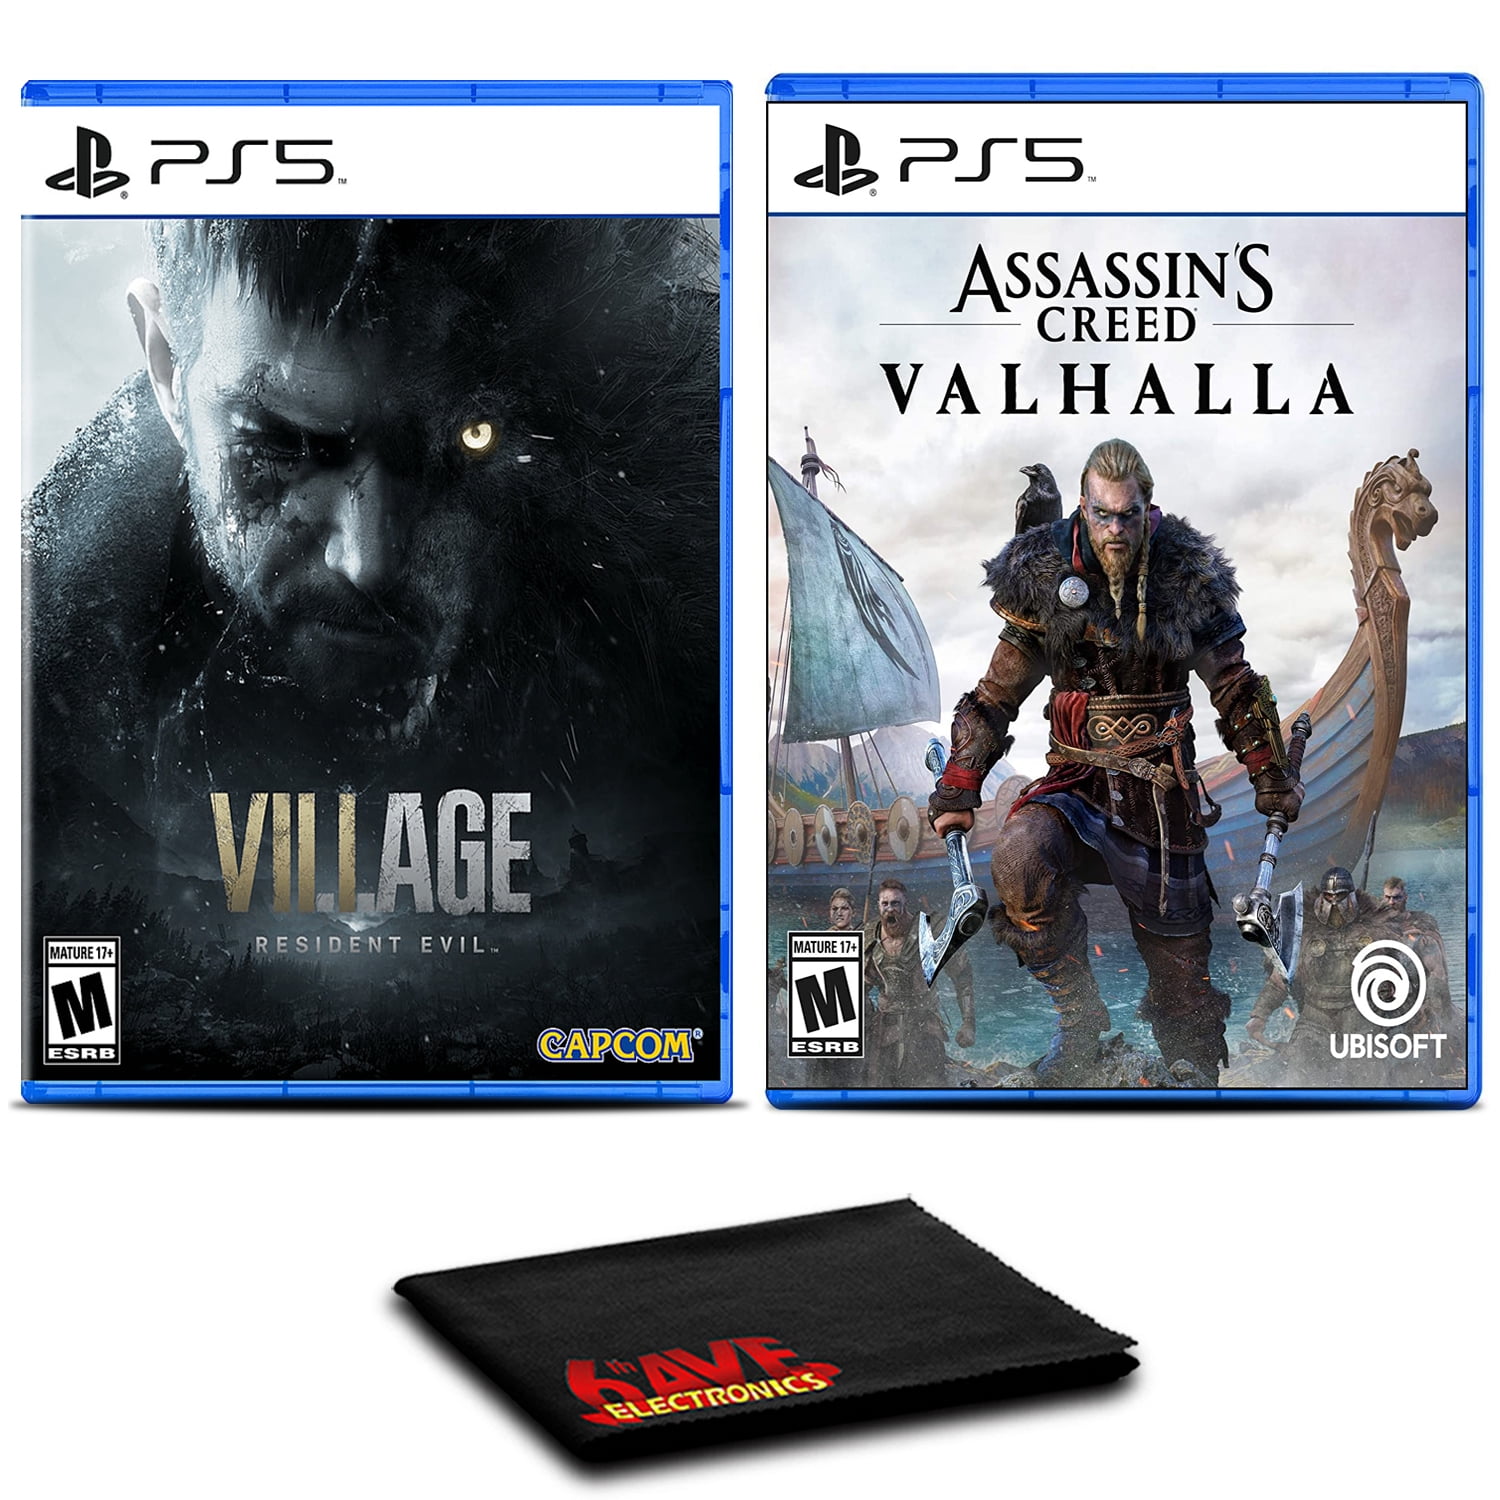 Вальгалла пс 5. Ассасин Вальгалла ps4. Assassin's Creed Valhalla ps5. Ps5 Chivalry 2 Steelbook Edition Gameplay.